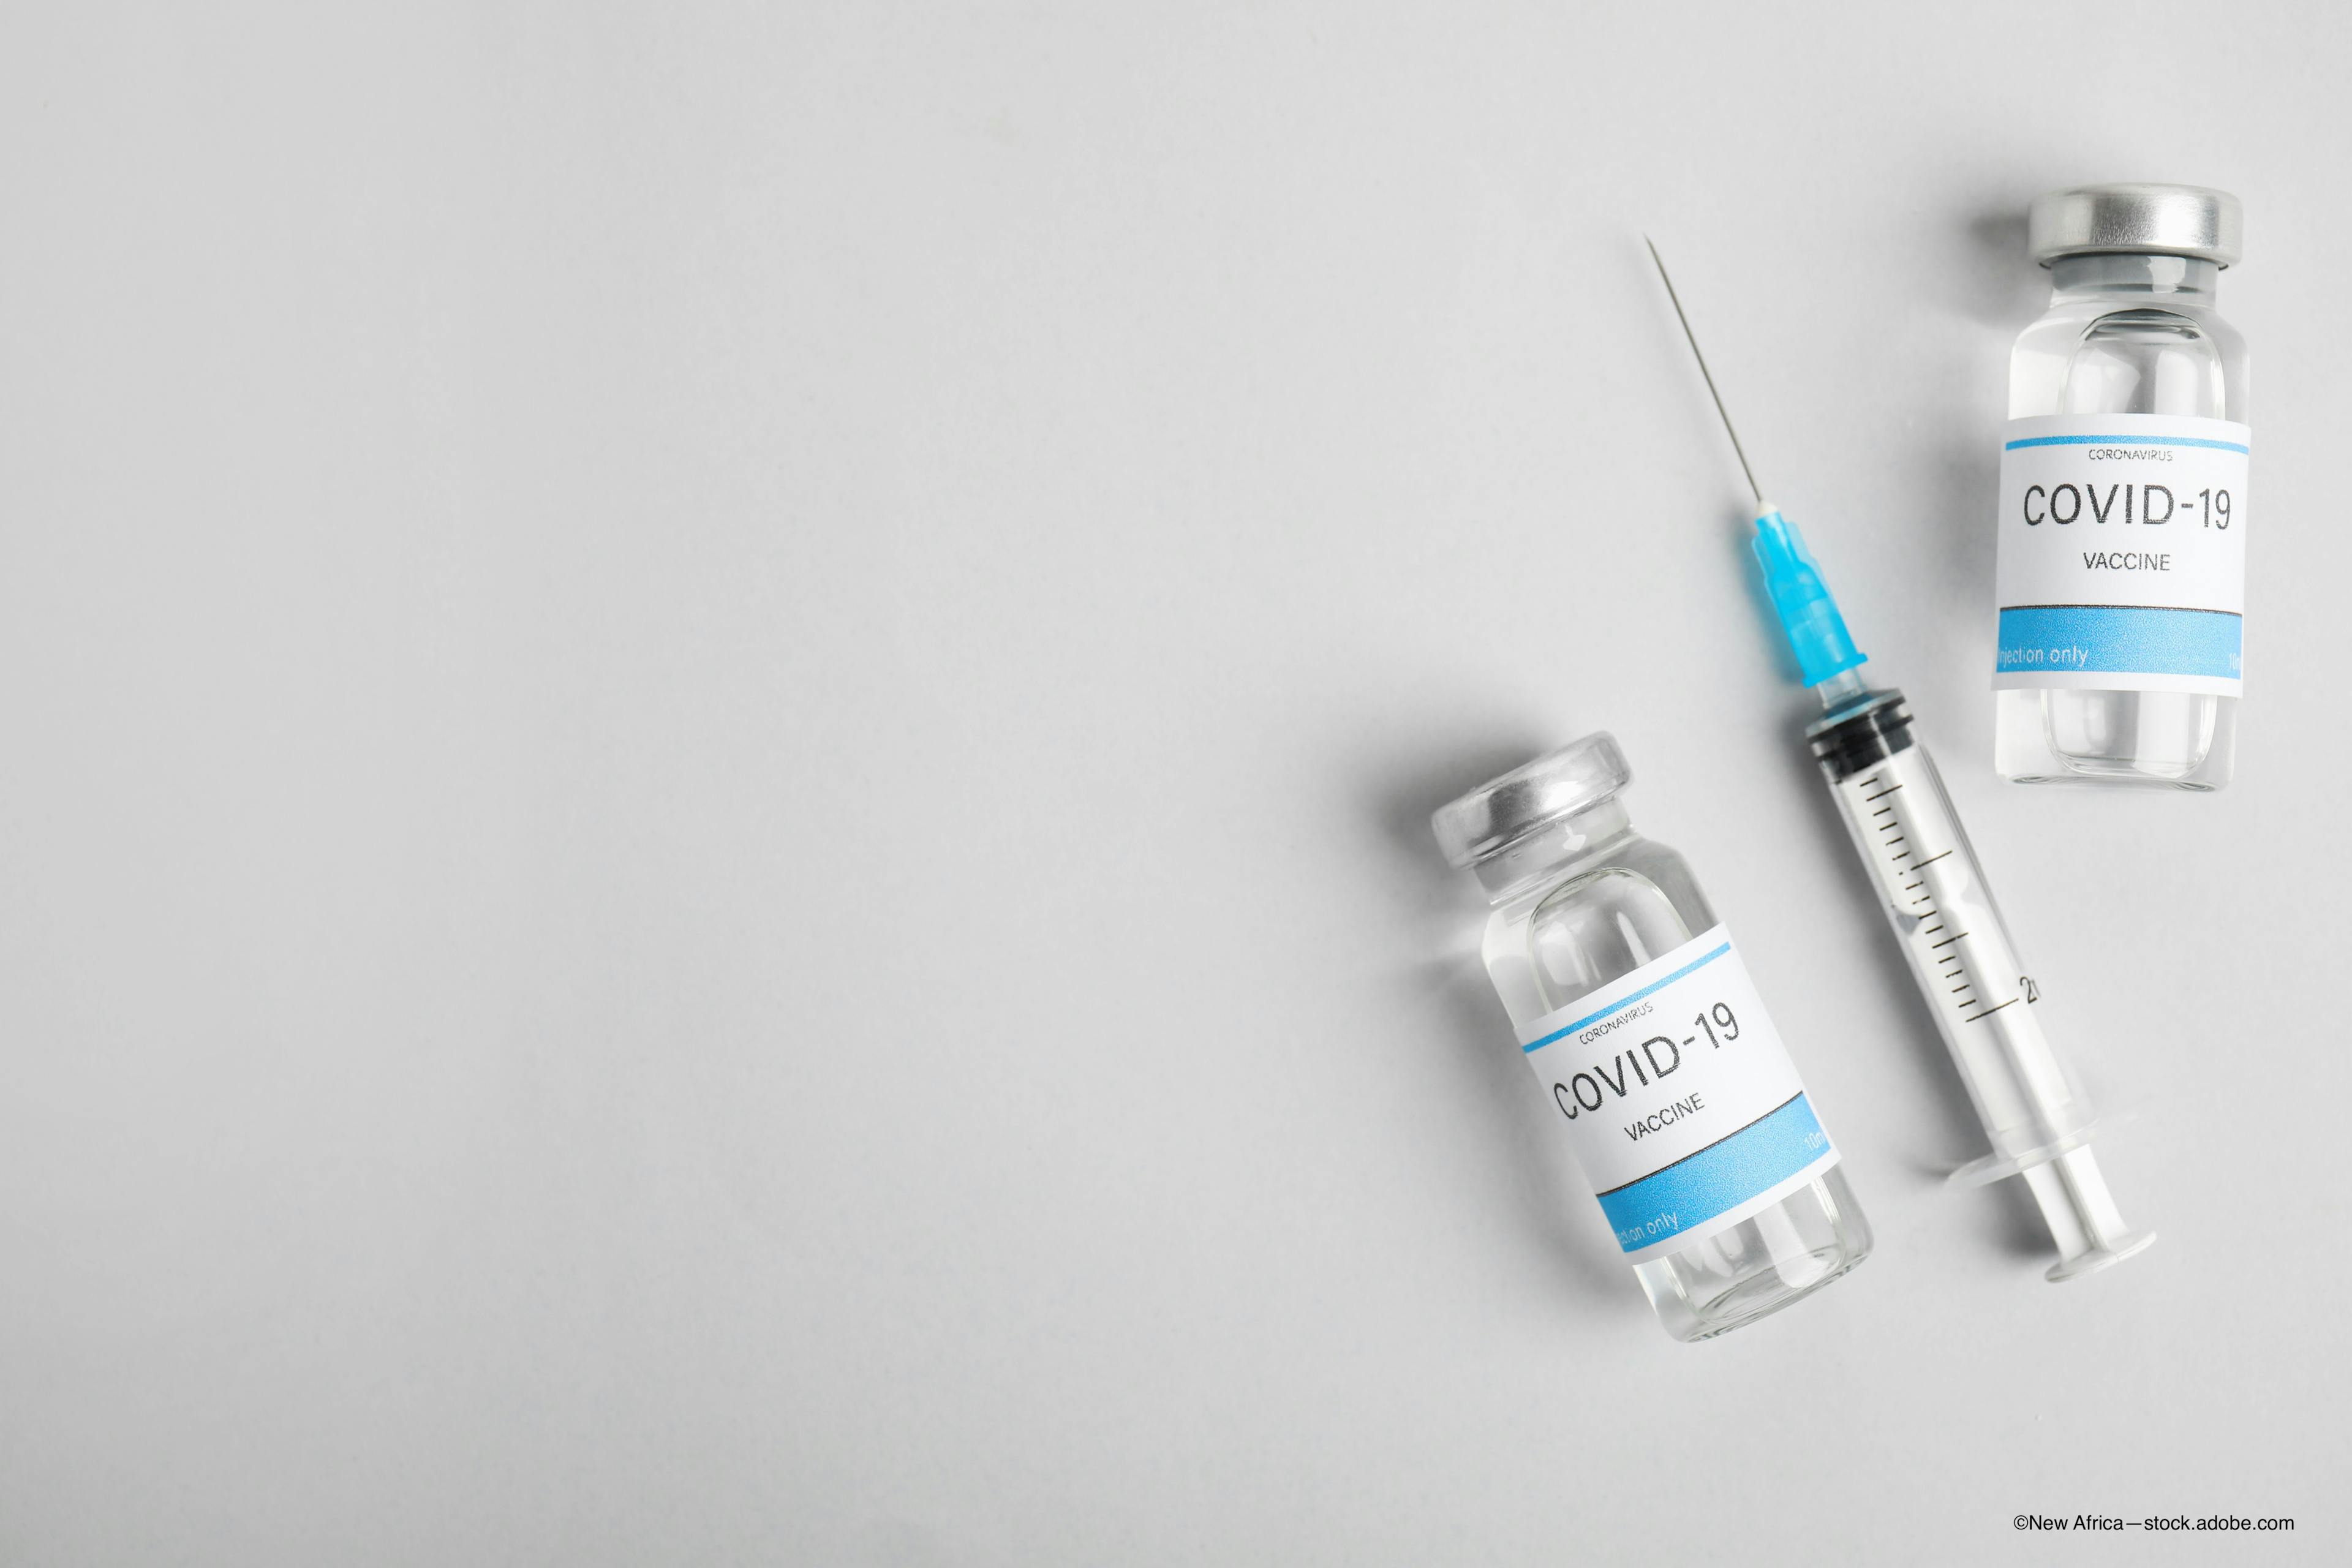 Pfizer-BioNTech COVID-19 vaccine receives full FDA approval